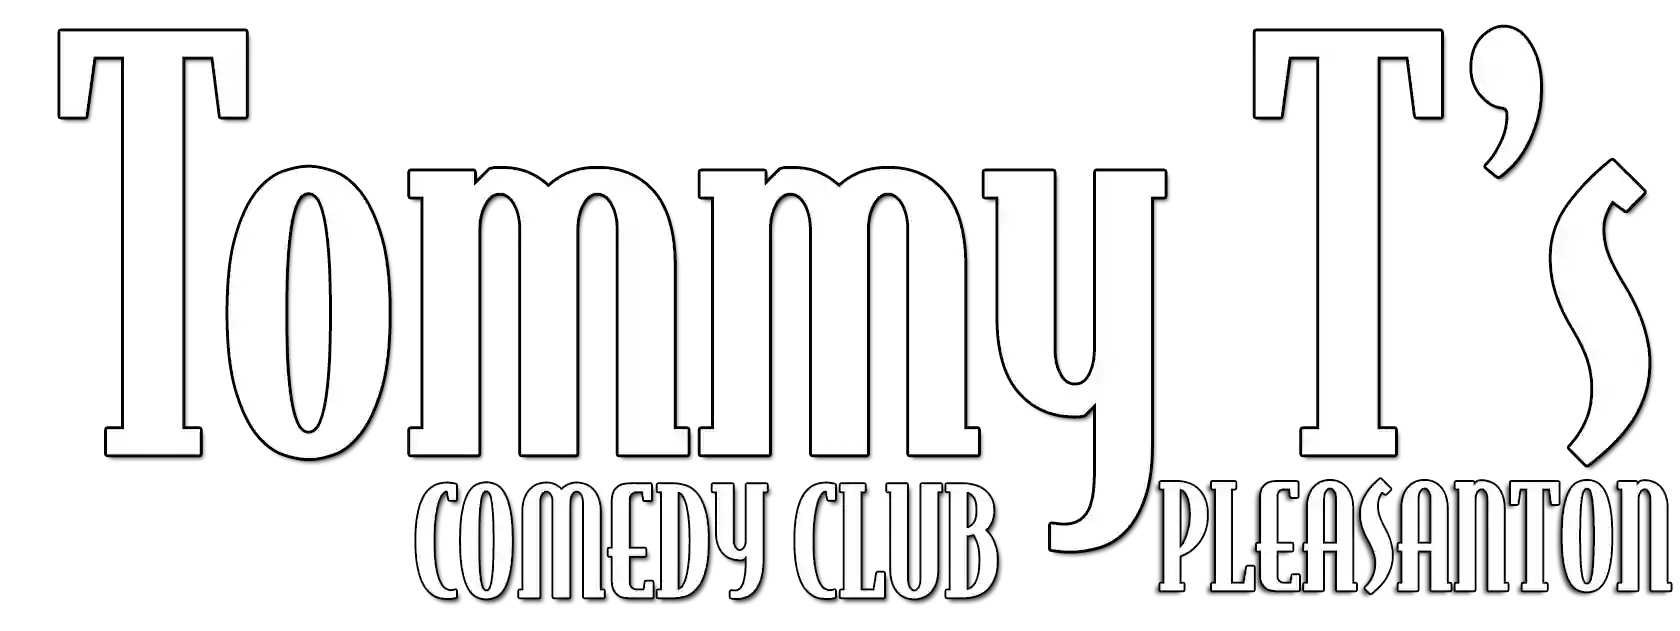 Tommy T's Comedy Club